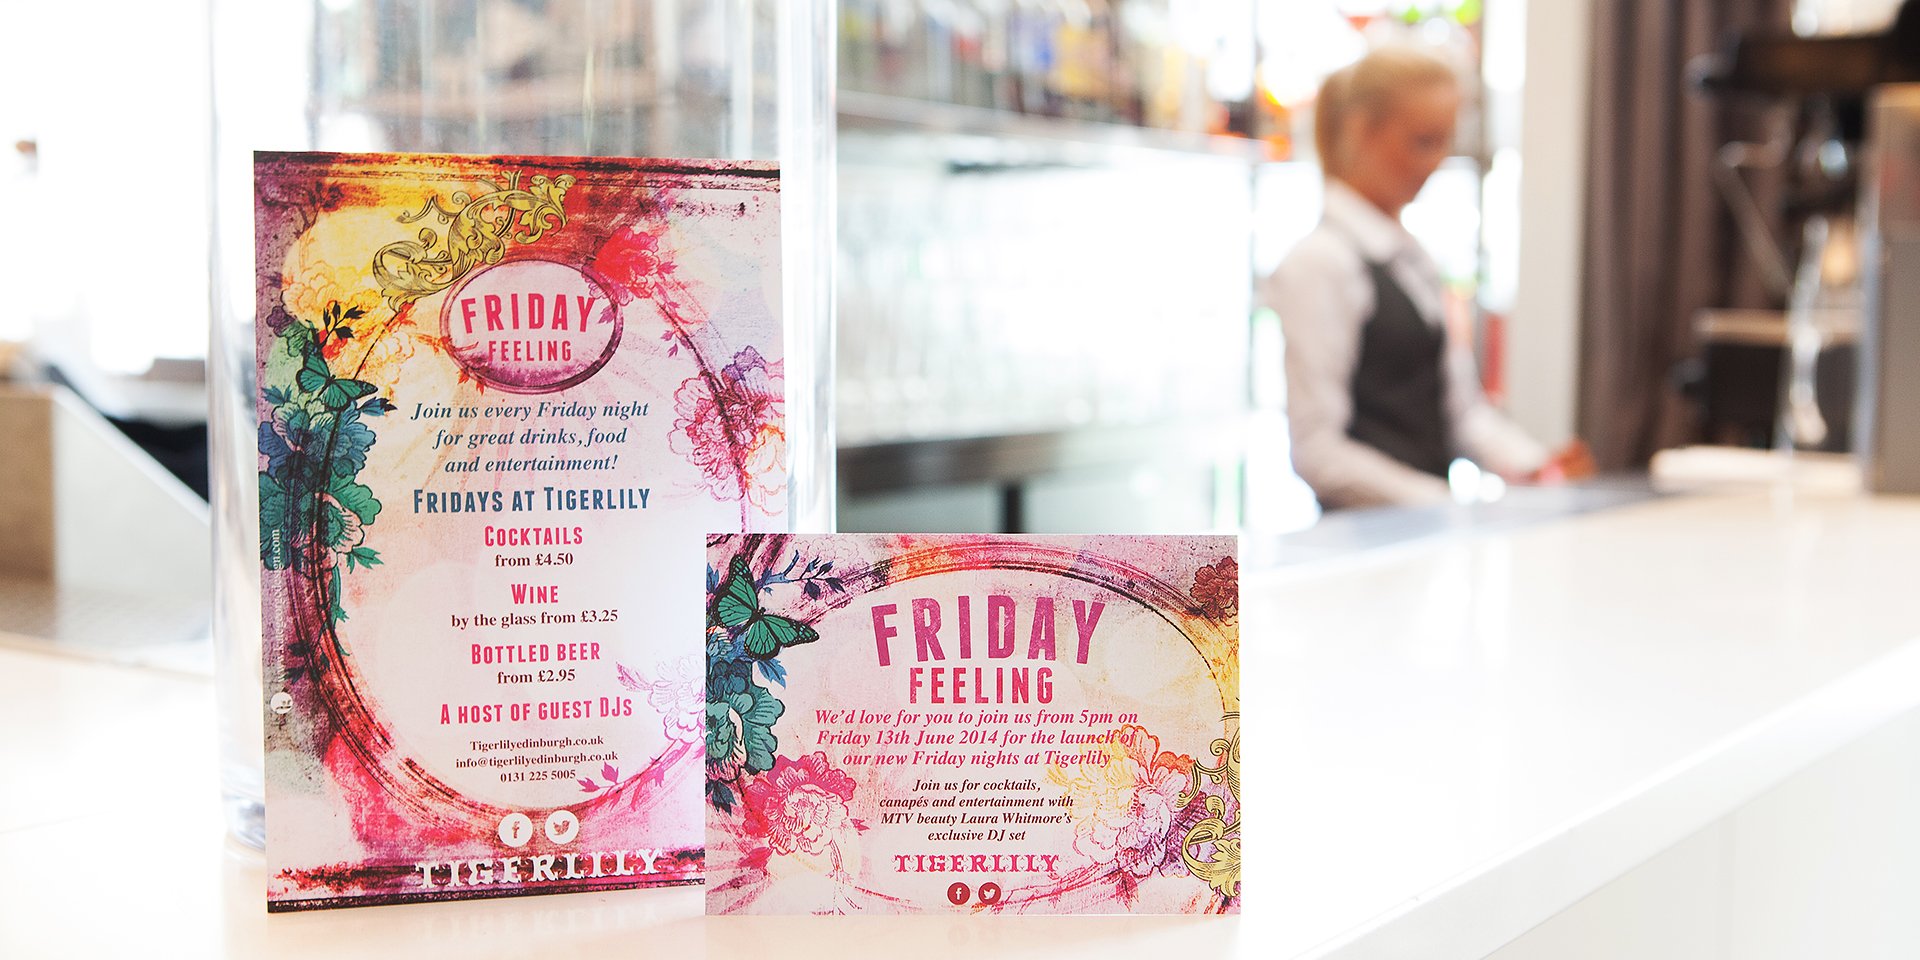 Beautiful floral inspired leaflets for Tigerlily Edinburgh 'Friday Feeling ' promotion nights